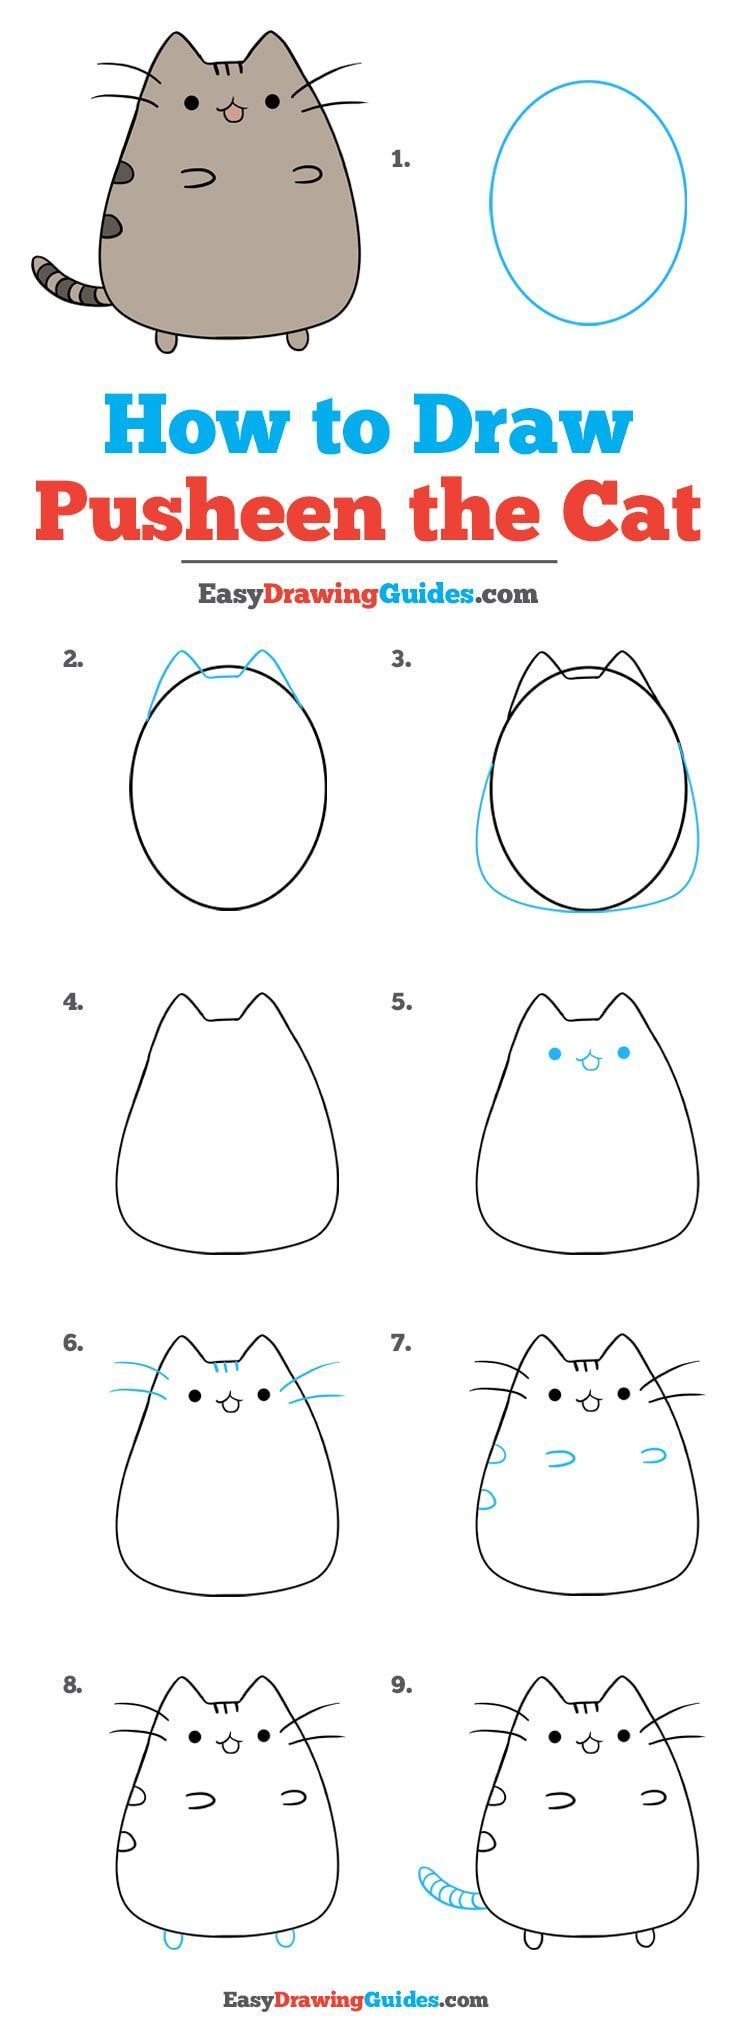 How To Draw Pusheen The Cat - Really Easy Drawing Tutorial